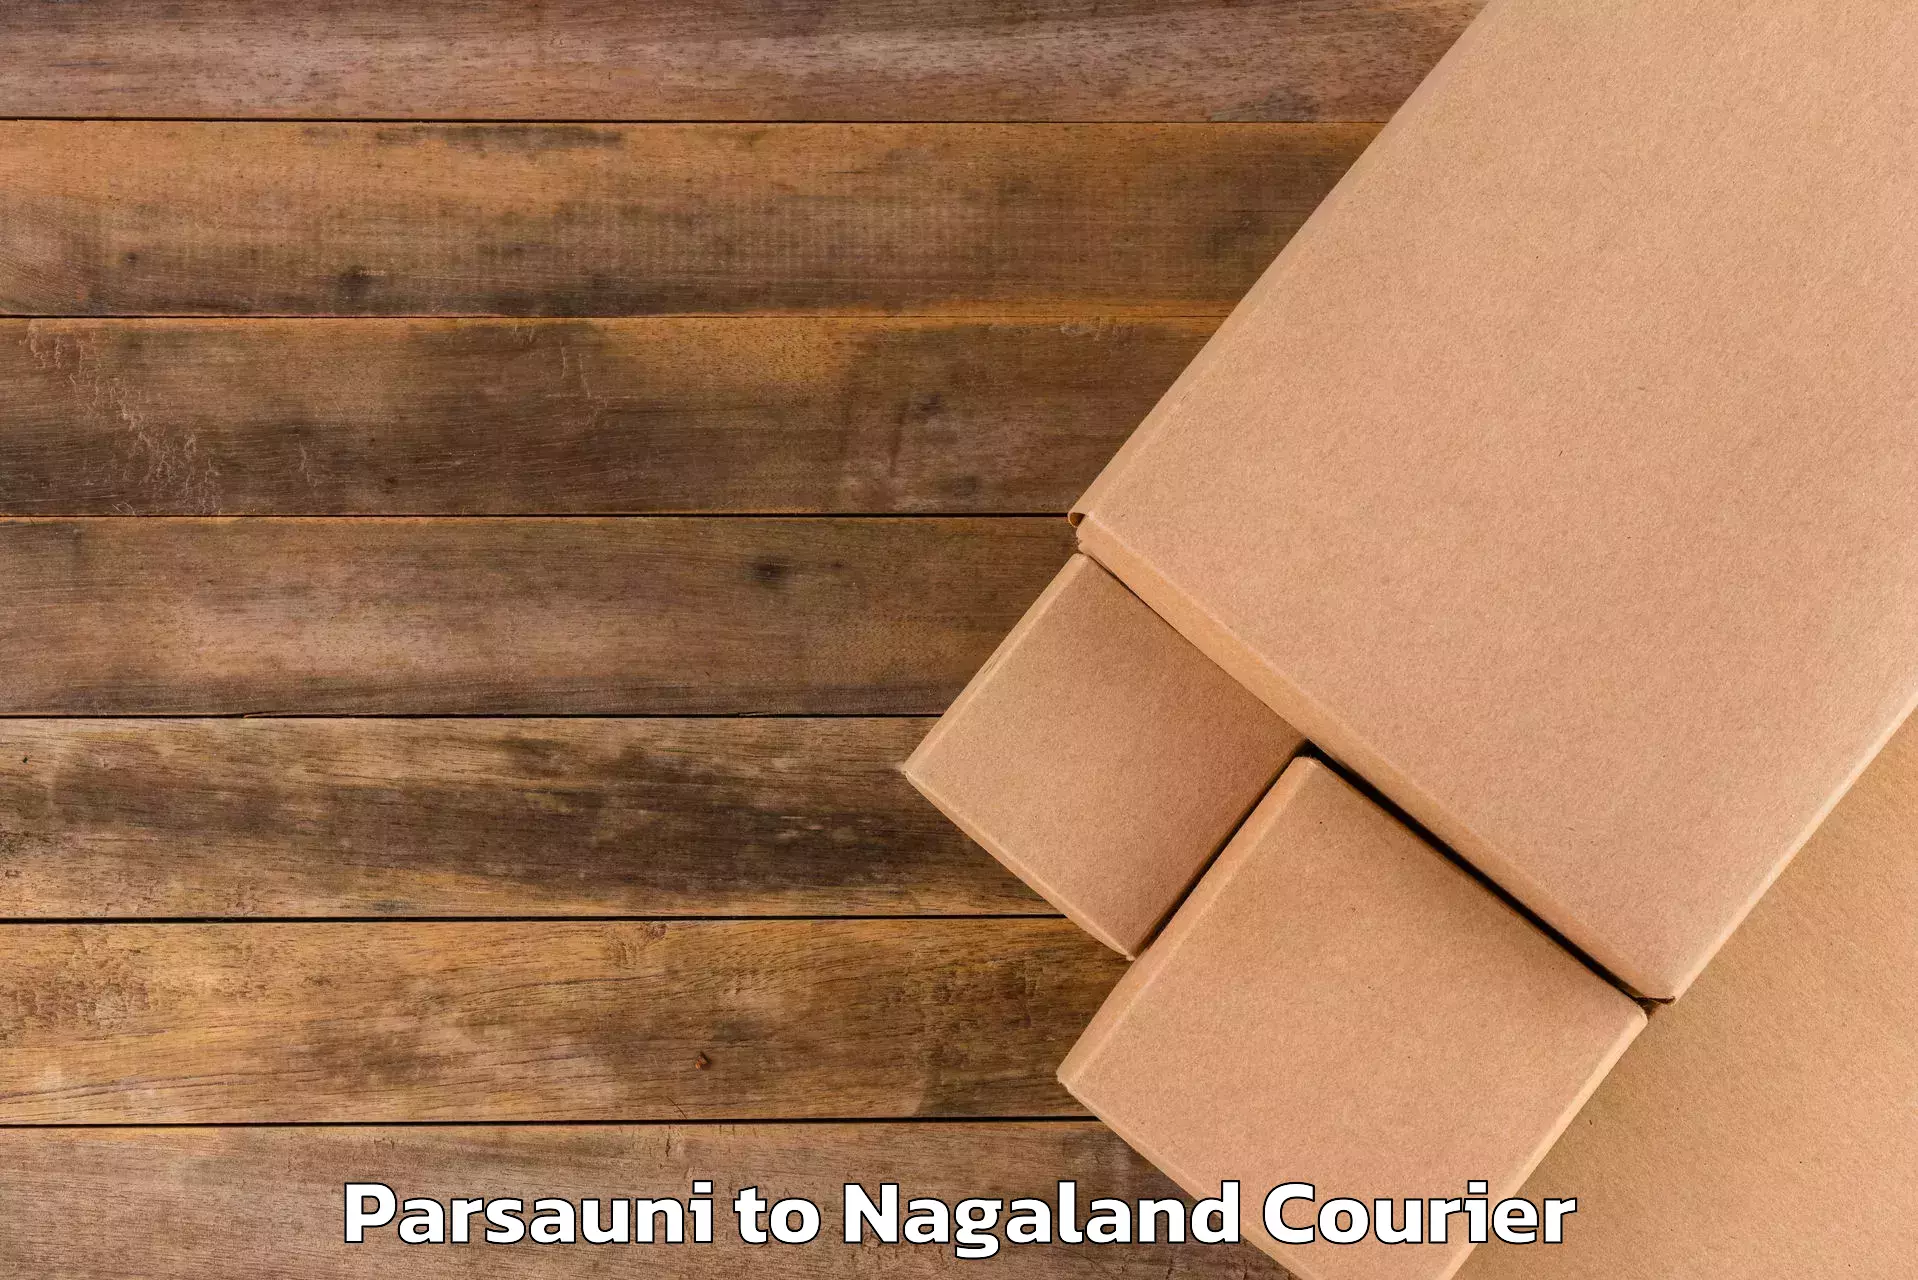 Luggage shipment specialists in Parsauni to Nagaland